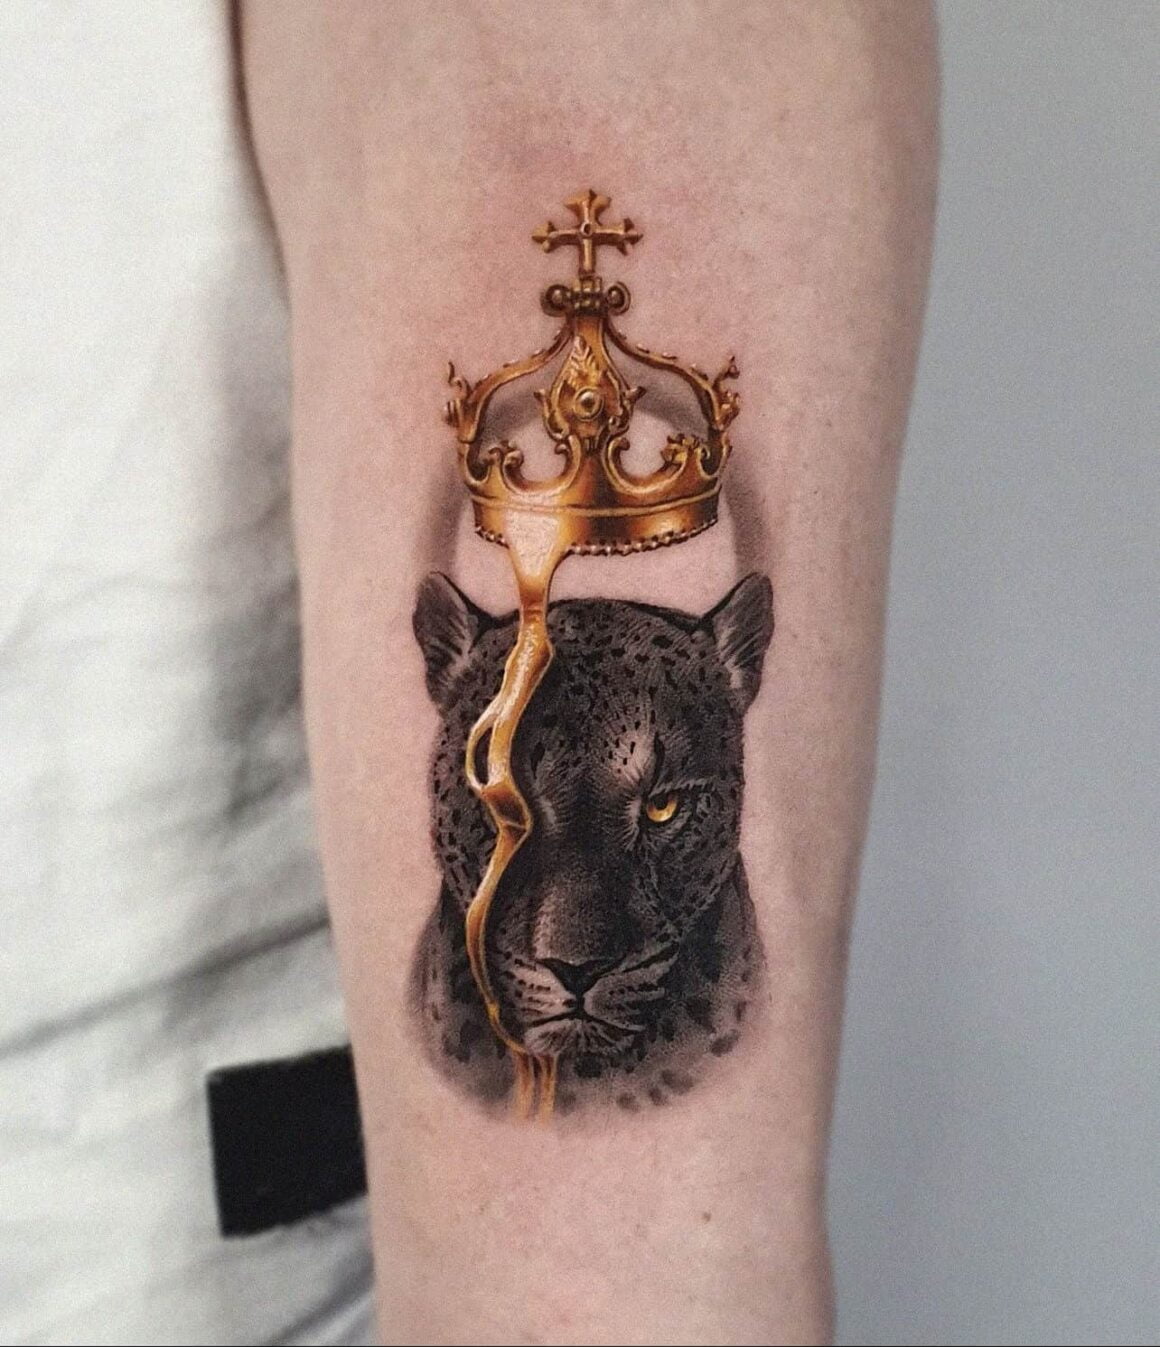 Crown tattoo on hand went wrong - Please help : r/tattoo